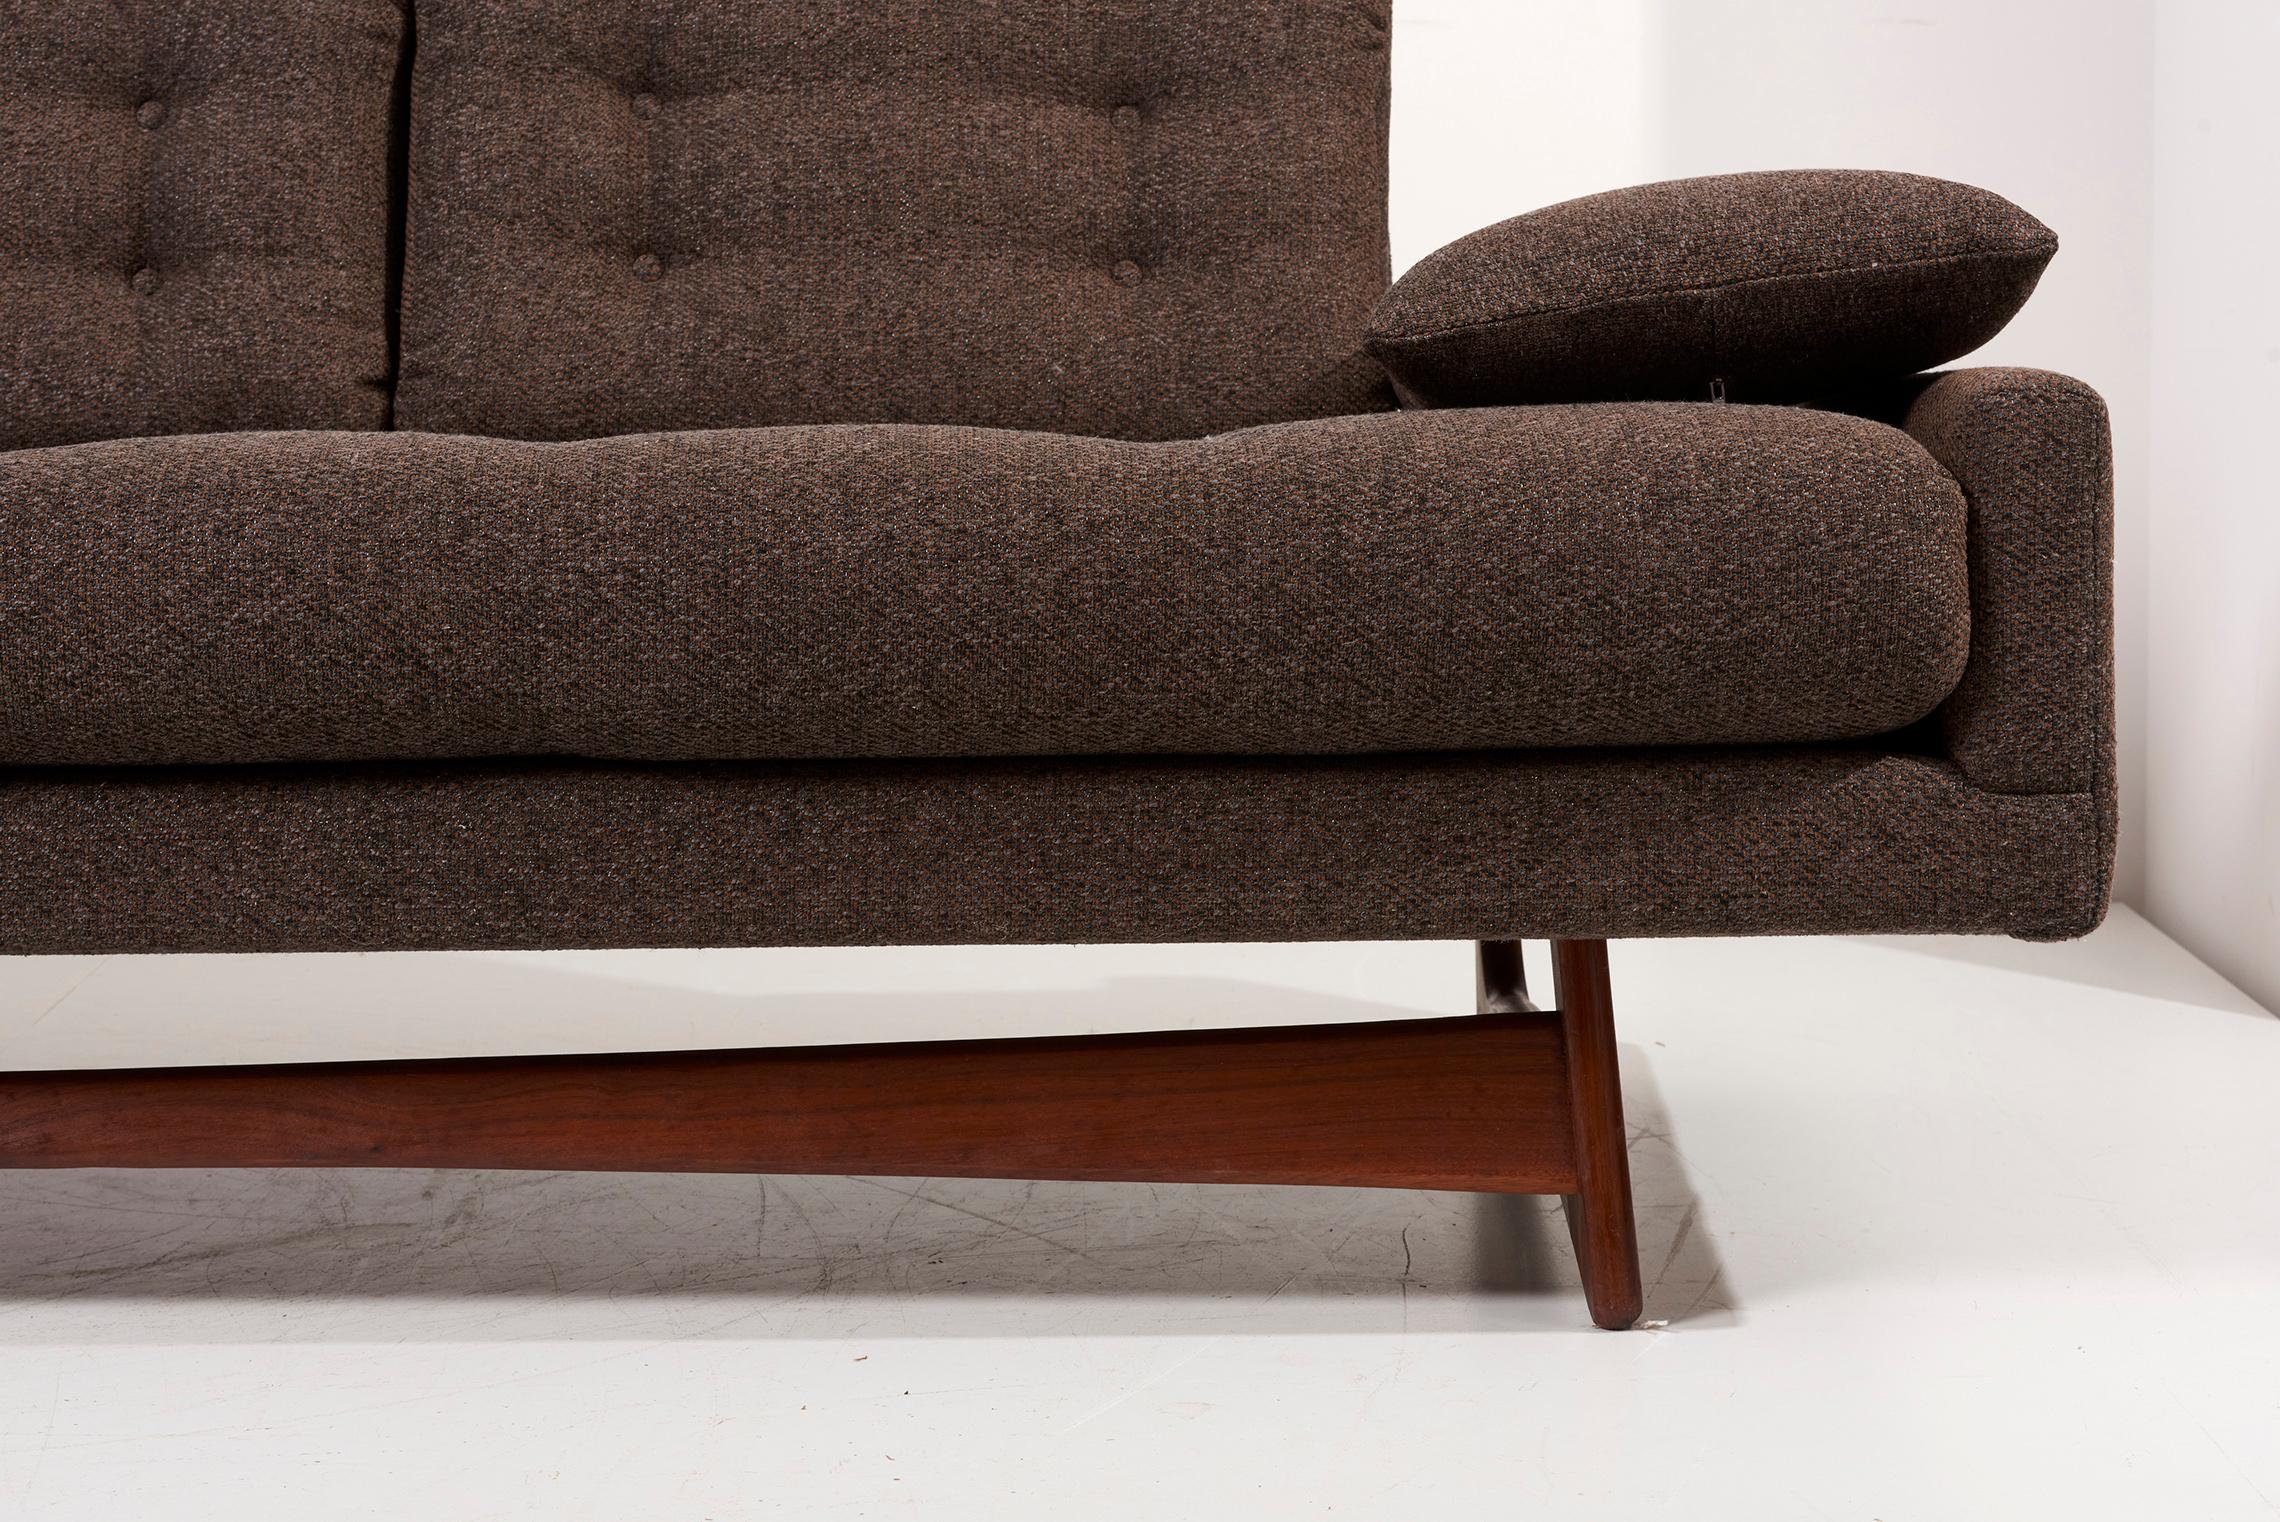 Adrian Pearsall 'Gondola Sofa' in Brown Fabric for Craft Associates, USA, 1950s For Sale 1